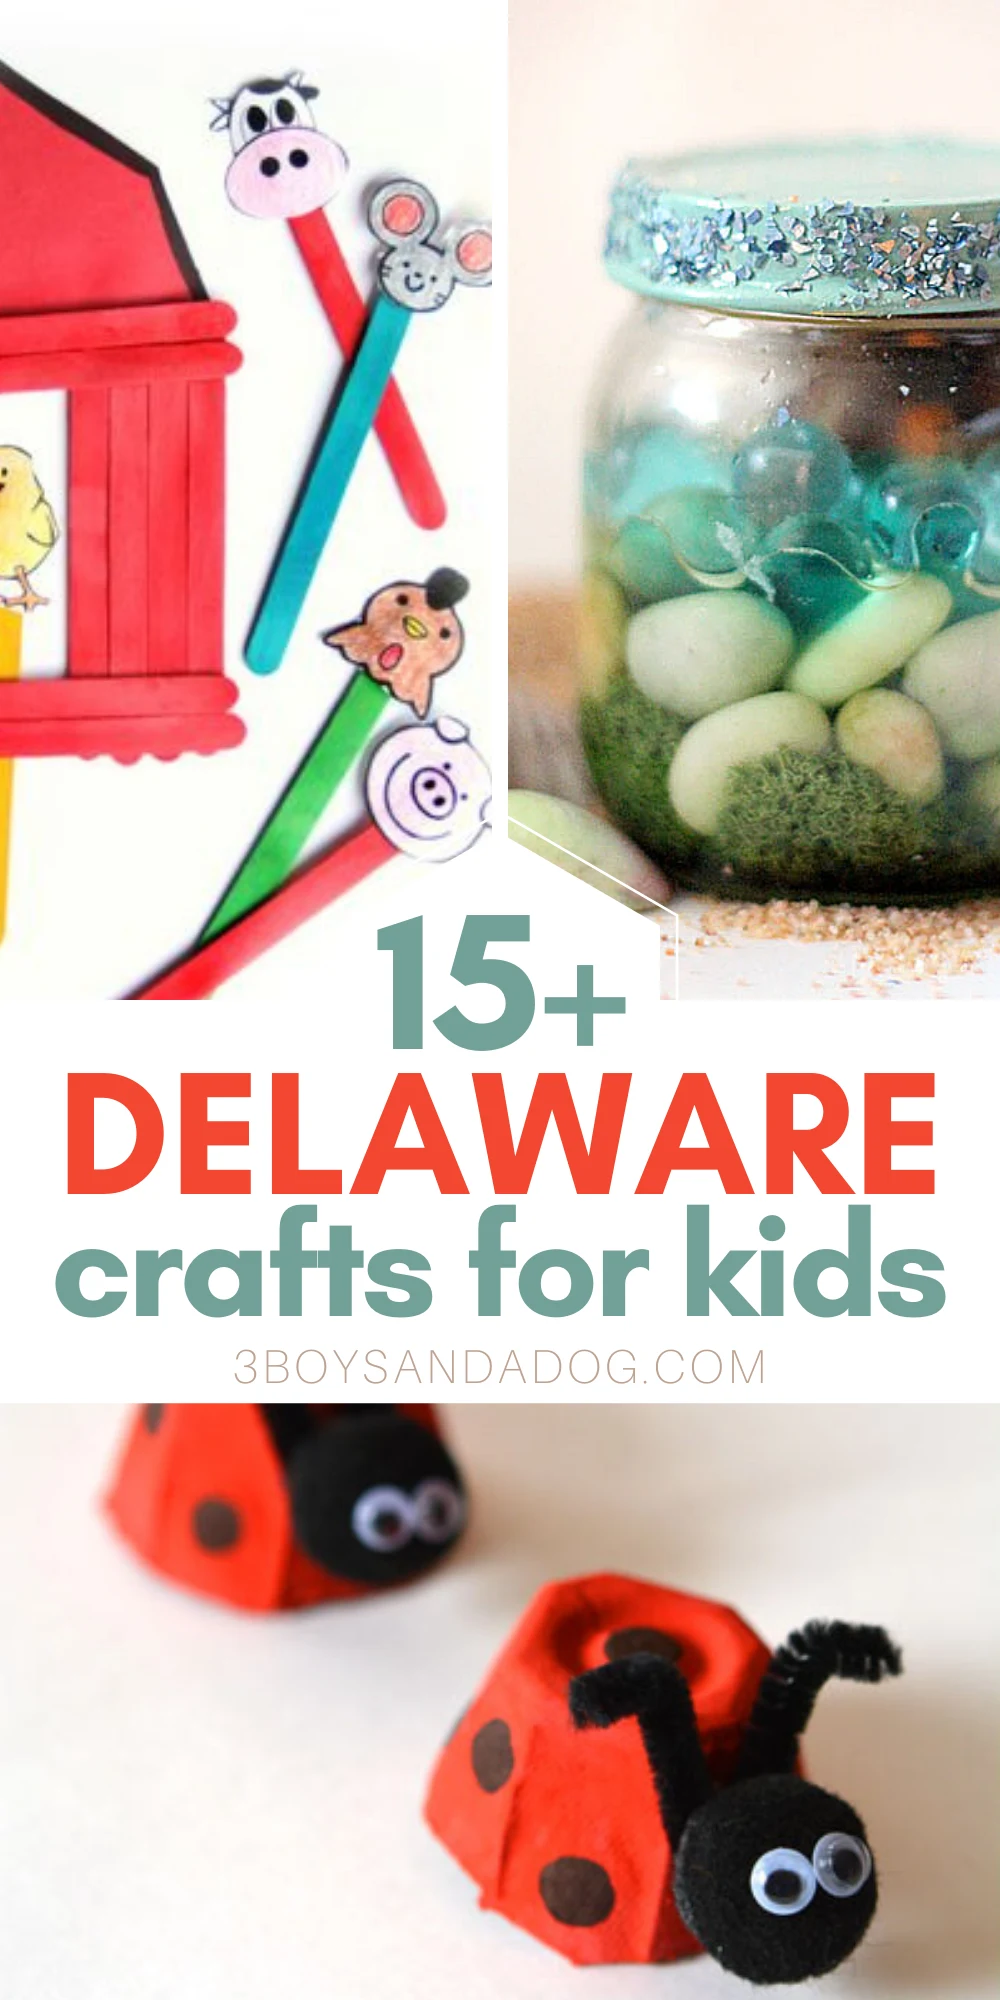 over 15 crafts about delaware geography and history